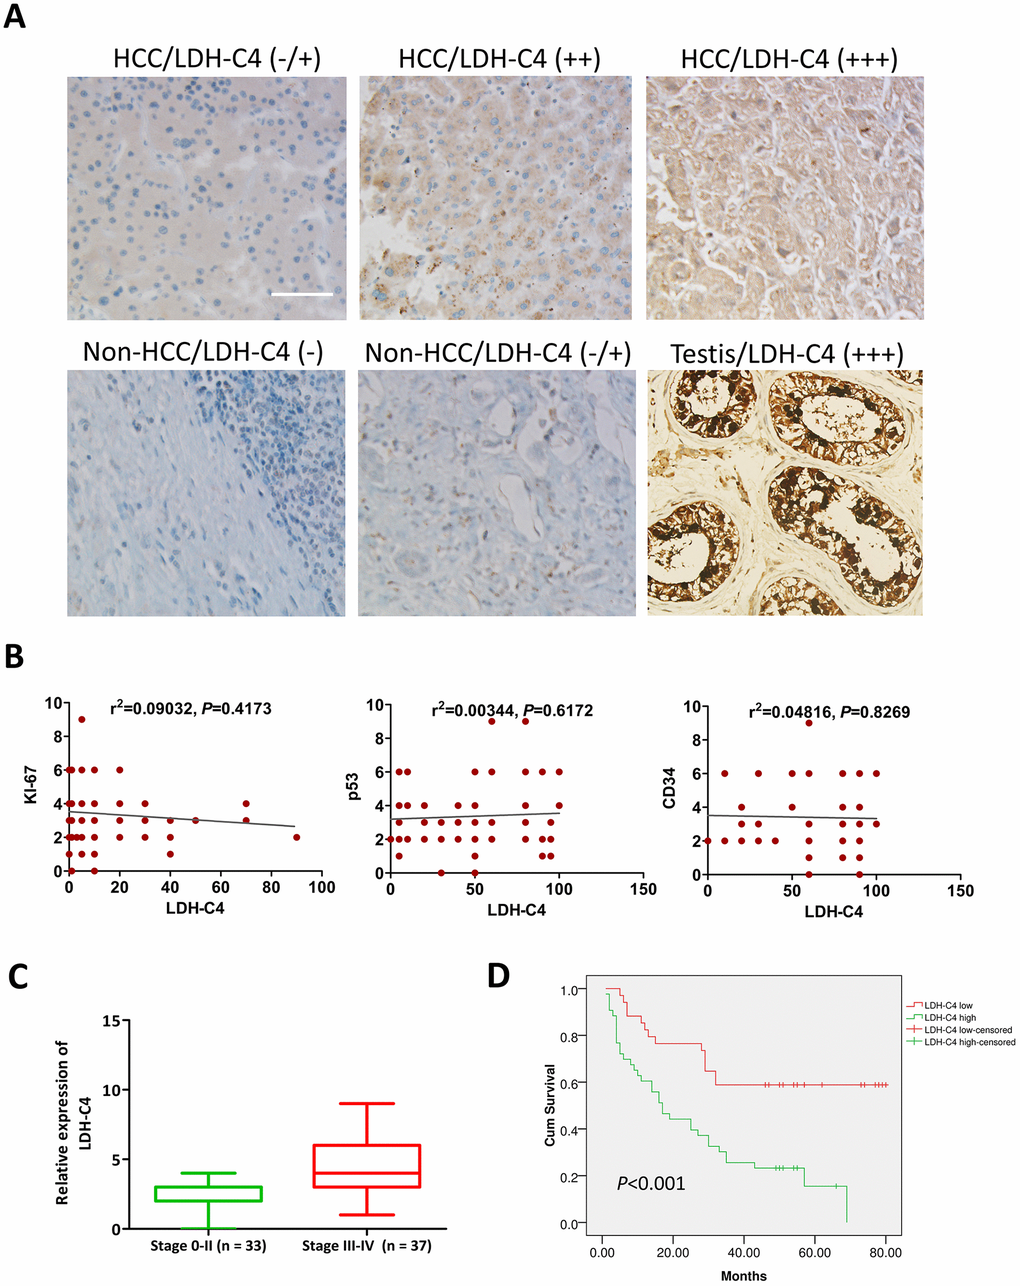 LDH-C4 expressions in HCC tissues using IHC analysis. (A) LDH-C4 levels were higher in HCC cancerous tissues than those in noncancerous tissues, and testis tissues were utilized as LDH-C4 positive controls (×200). (B) LDH-C4 levels were not significantly correlated with KI-67, p53 and CD34 expressions in HCC tissues. (C) LDH-C4 levels (rating scores) were higher in stage 0-II HCC patients than those in stage III-IV HCC patients. (D) The Kaplan-Meier analysis showed that LDH-C4 was negatively correlated with the prognosis of HCC patients, and higher levels of LDH-C4 implied worse prognosis.